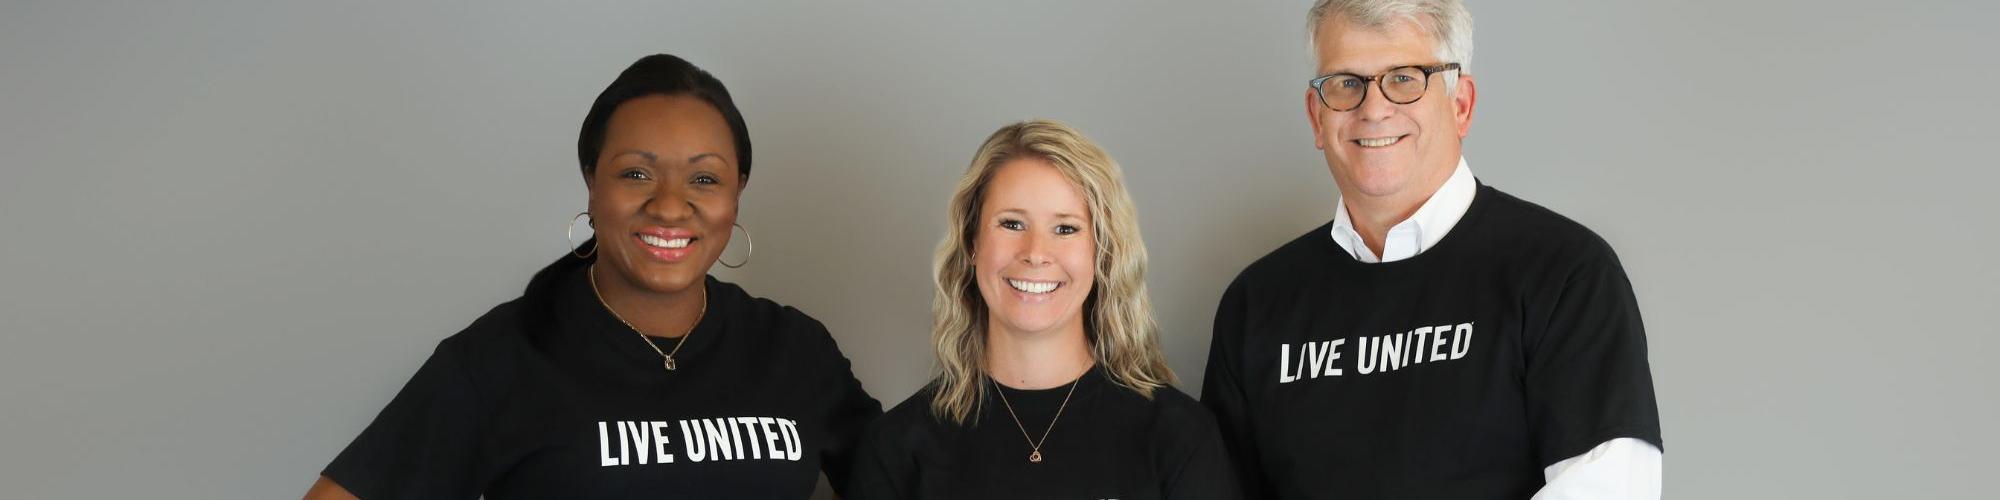 Three people smiling in LIVE UNITED shirts